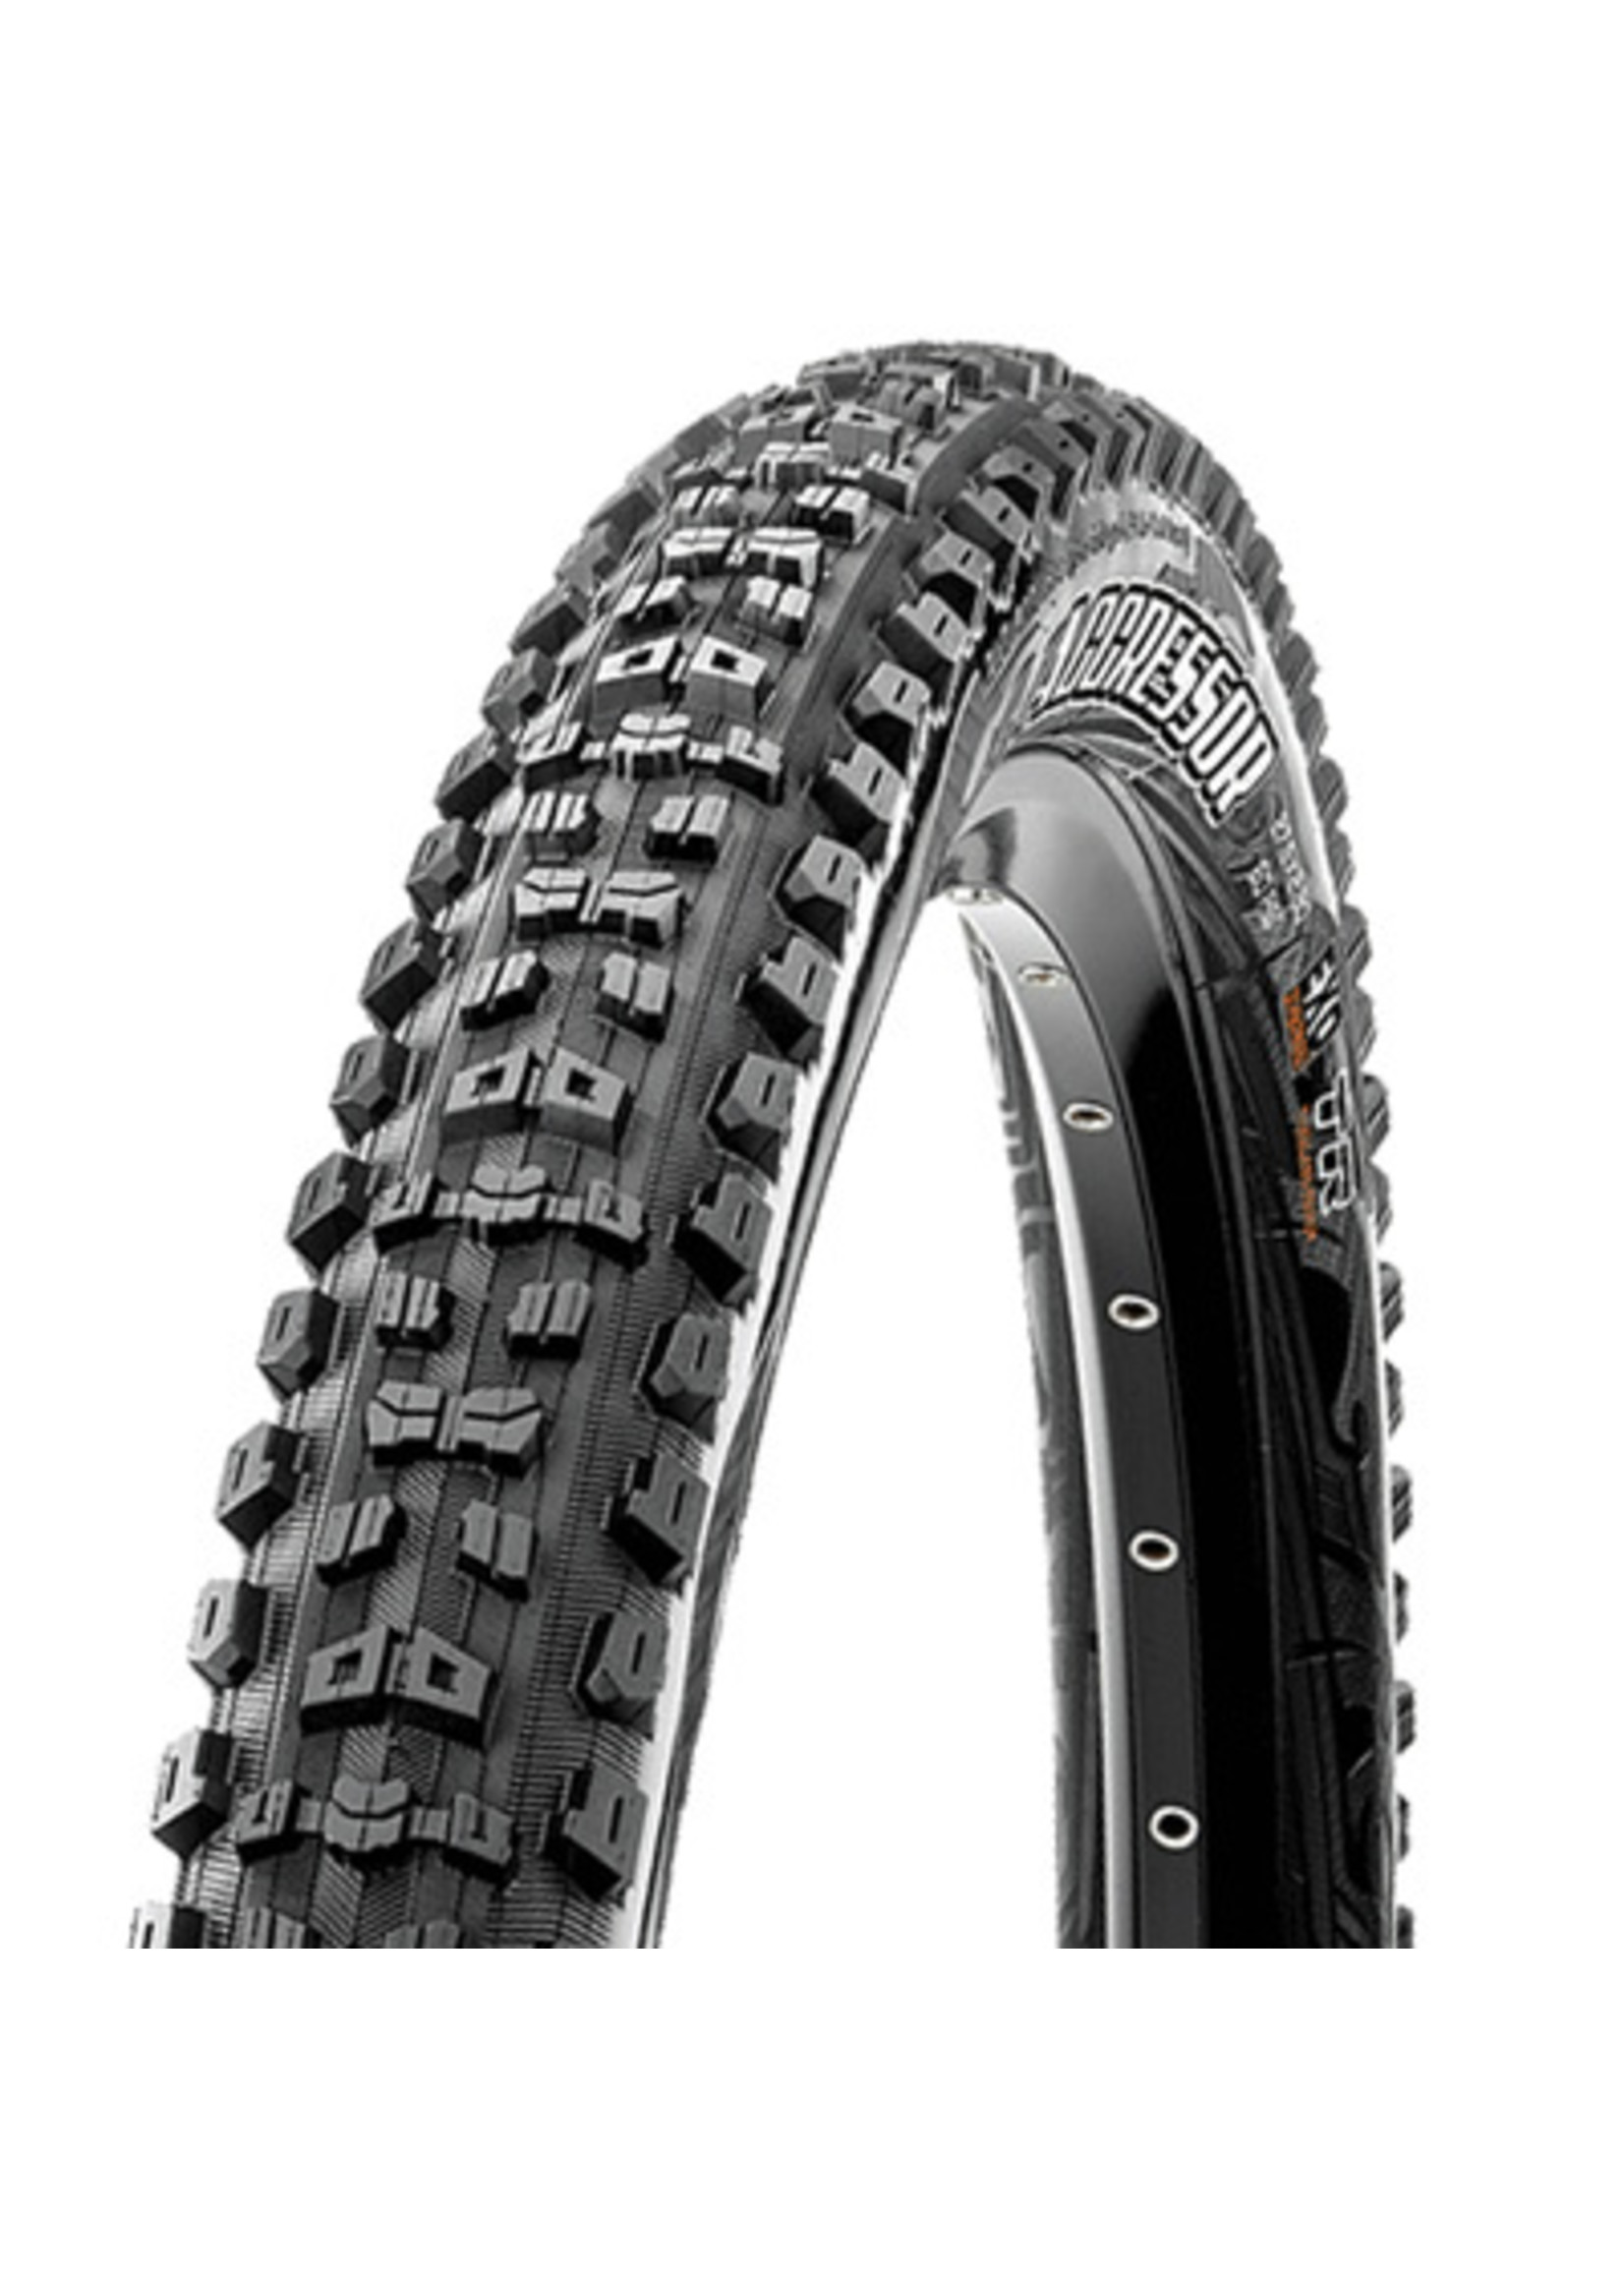 MAXXIS Maxxis Aggressor Tire 27.5 x 2.5" 60tpi Dual Compound EXO Casing Tubeless Ready, Black